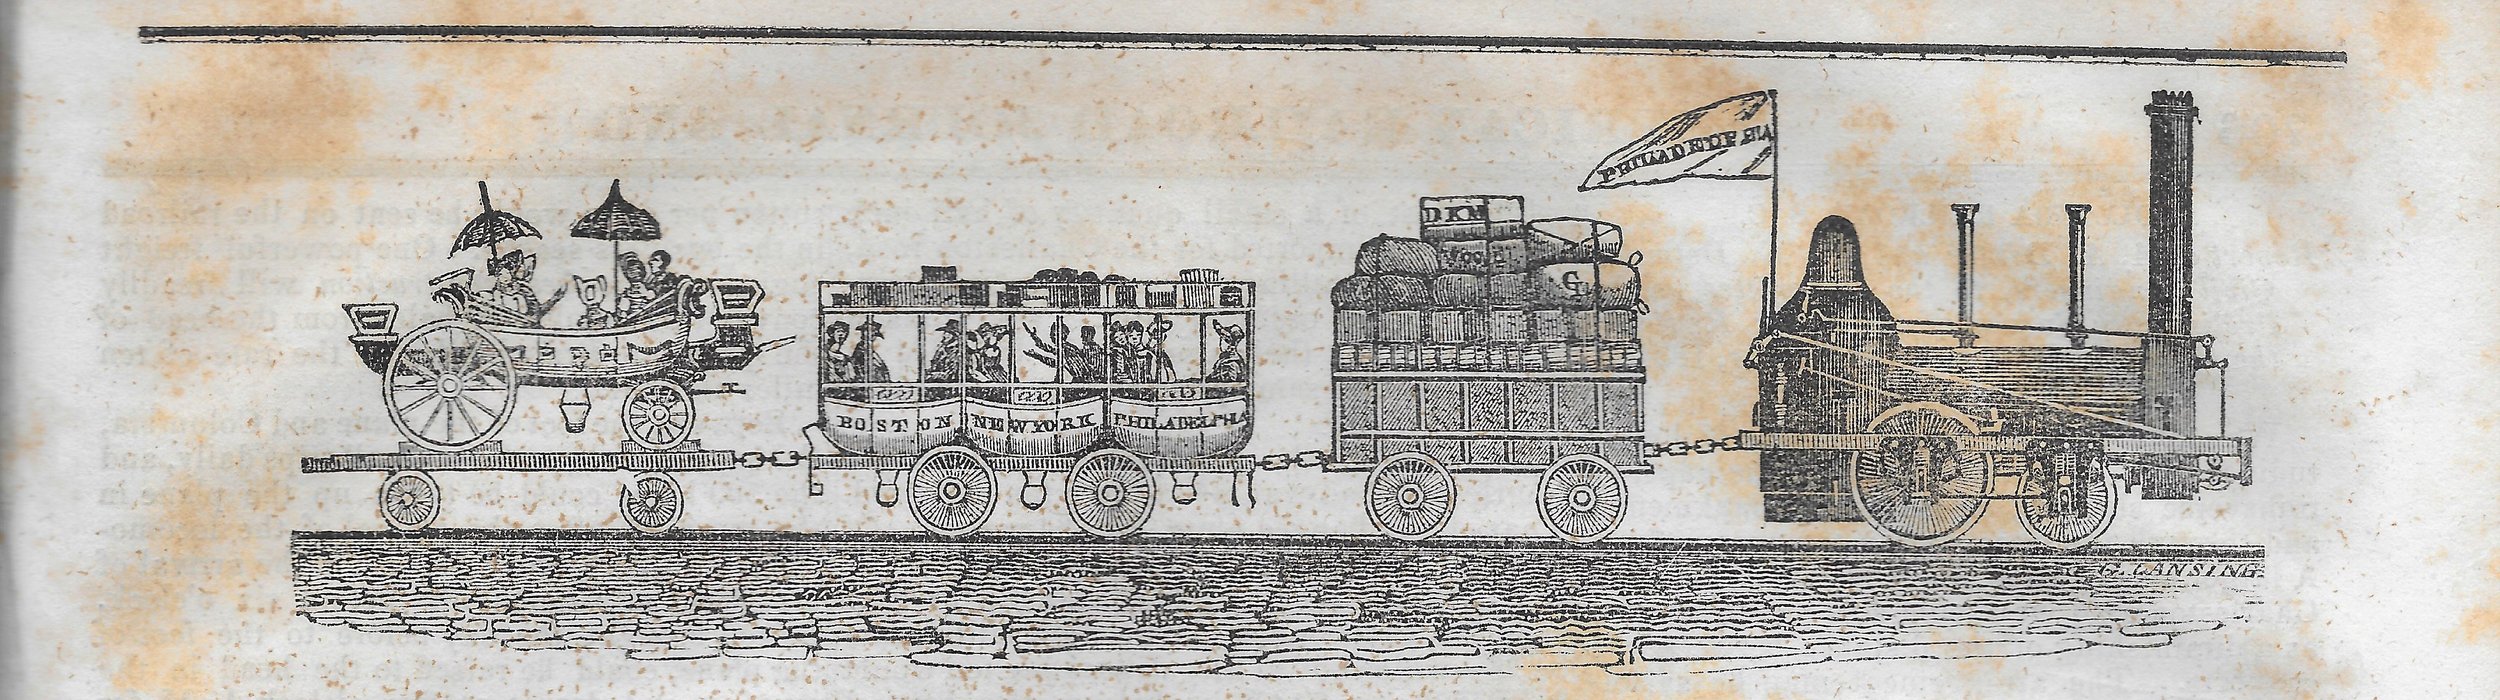  An early locomotive from the 1830s 